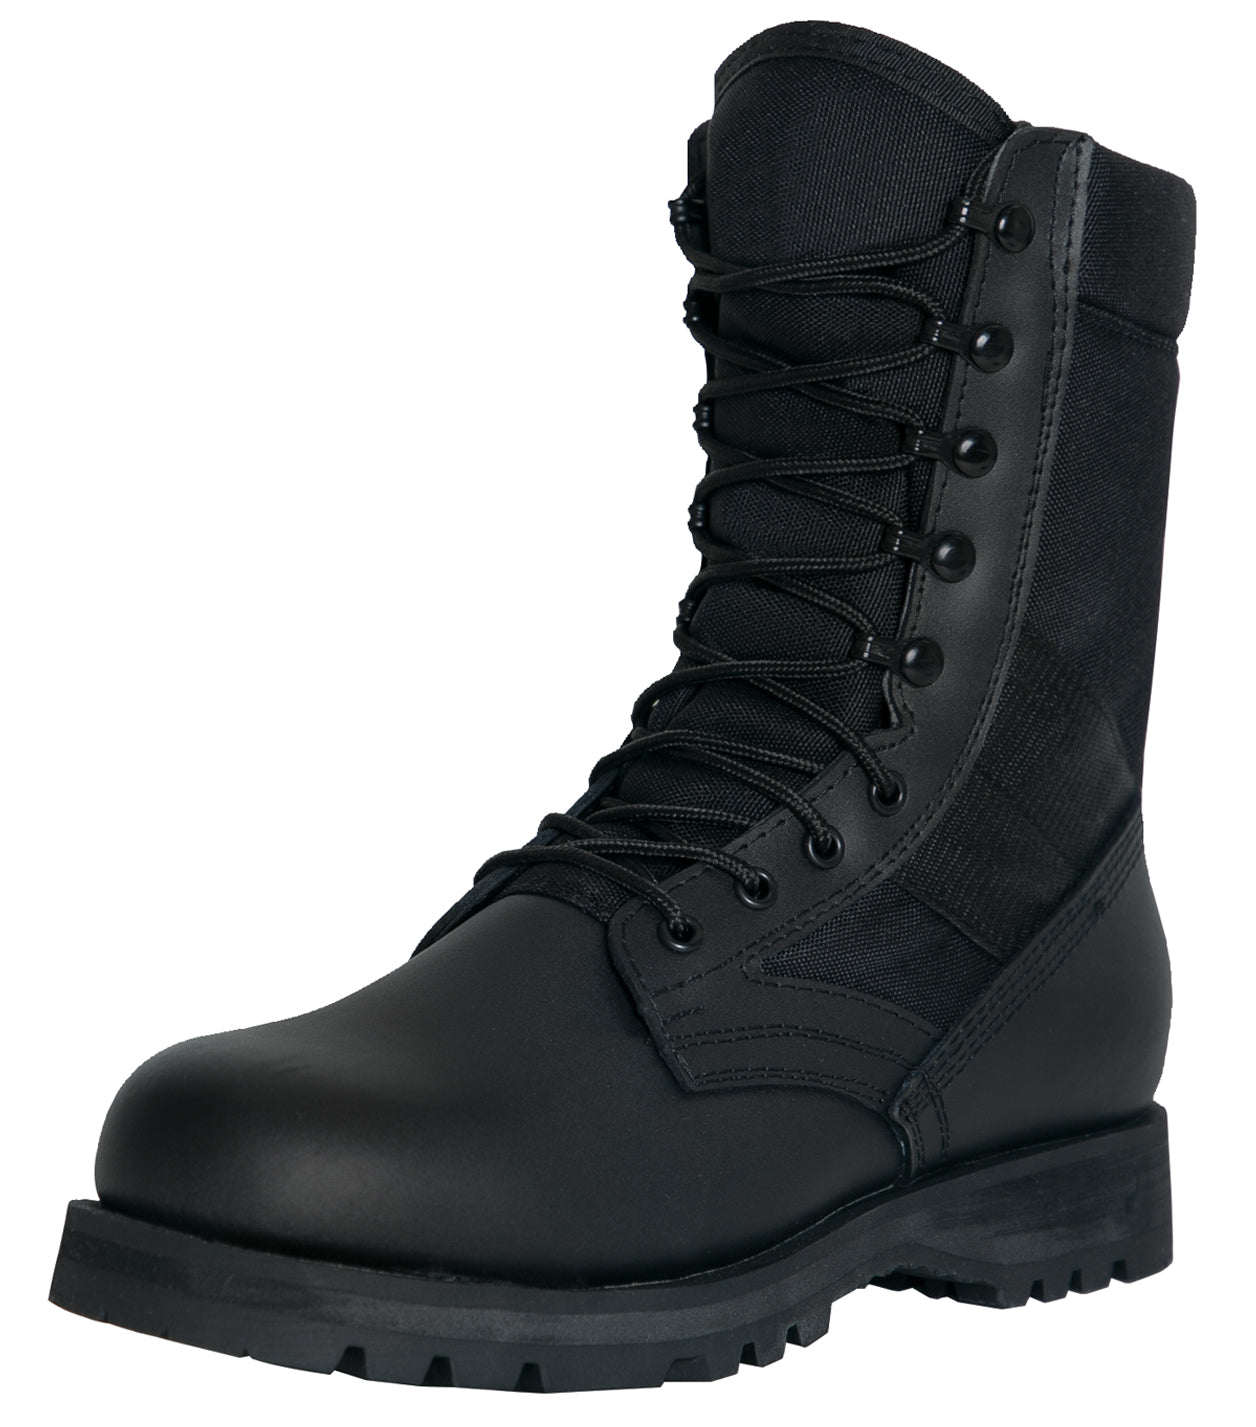 Rothco G.I. Type Sierra Sole Tactical Boots - 8 Inch - Tactical Choice Plus